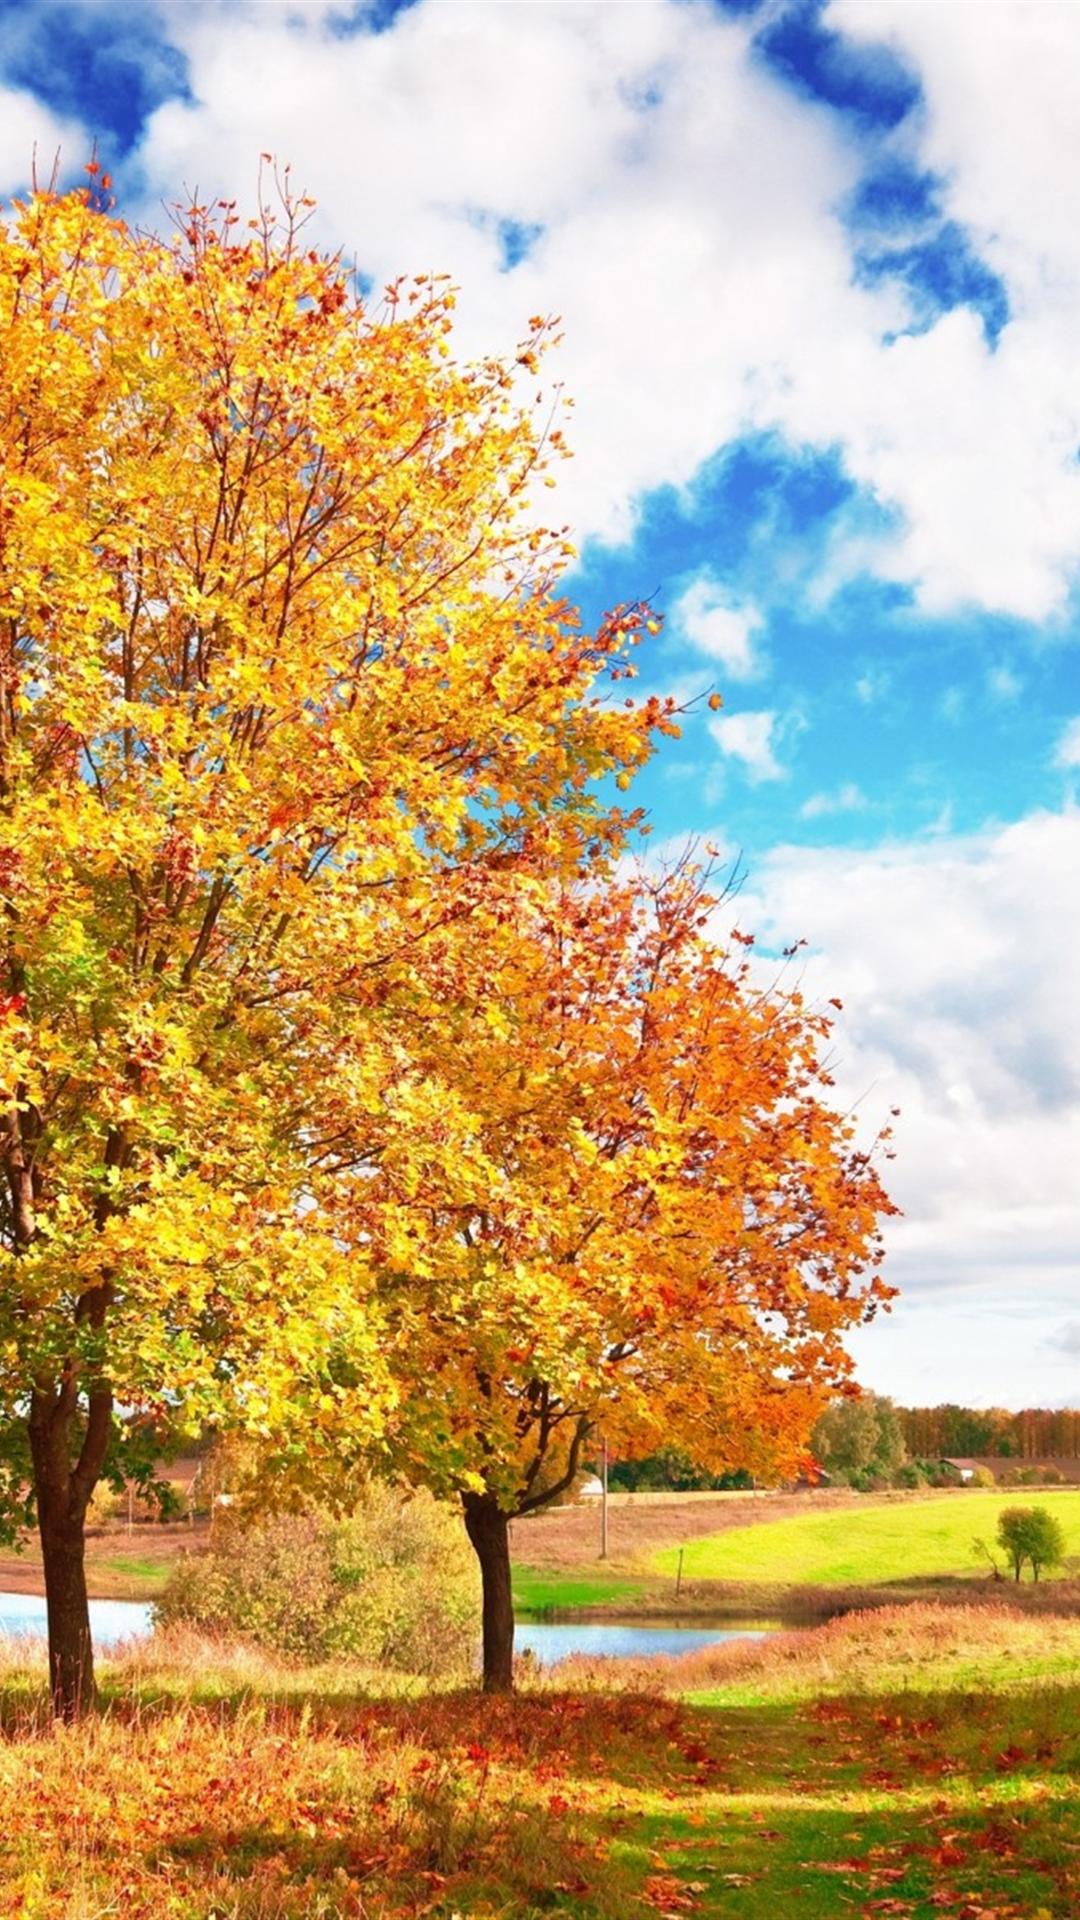 Autumn Wallpaper Hd For Iphone - Bright Wallpaper For Phone , HD Wallpaper & Backgrounds